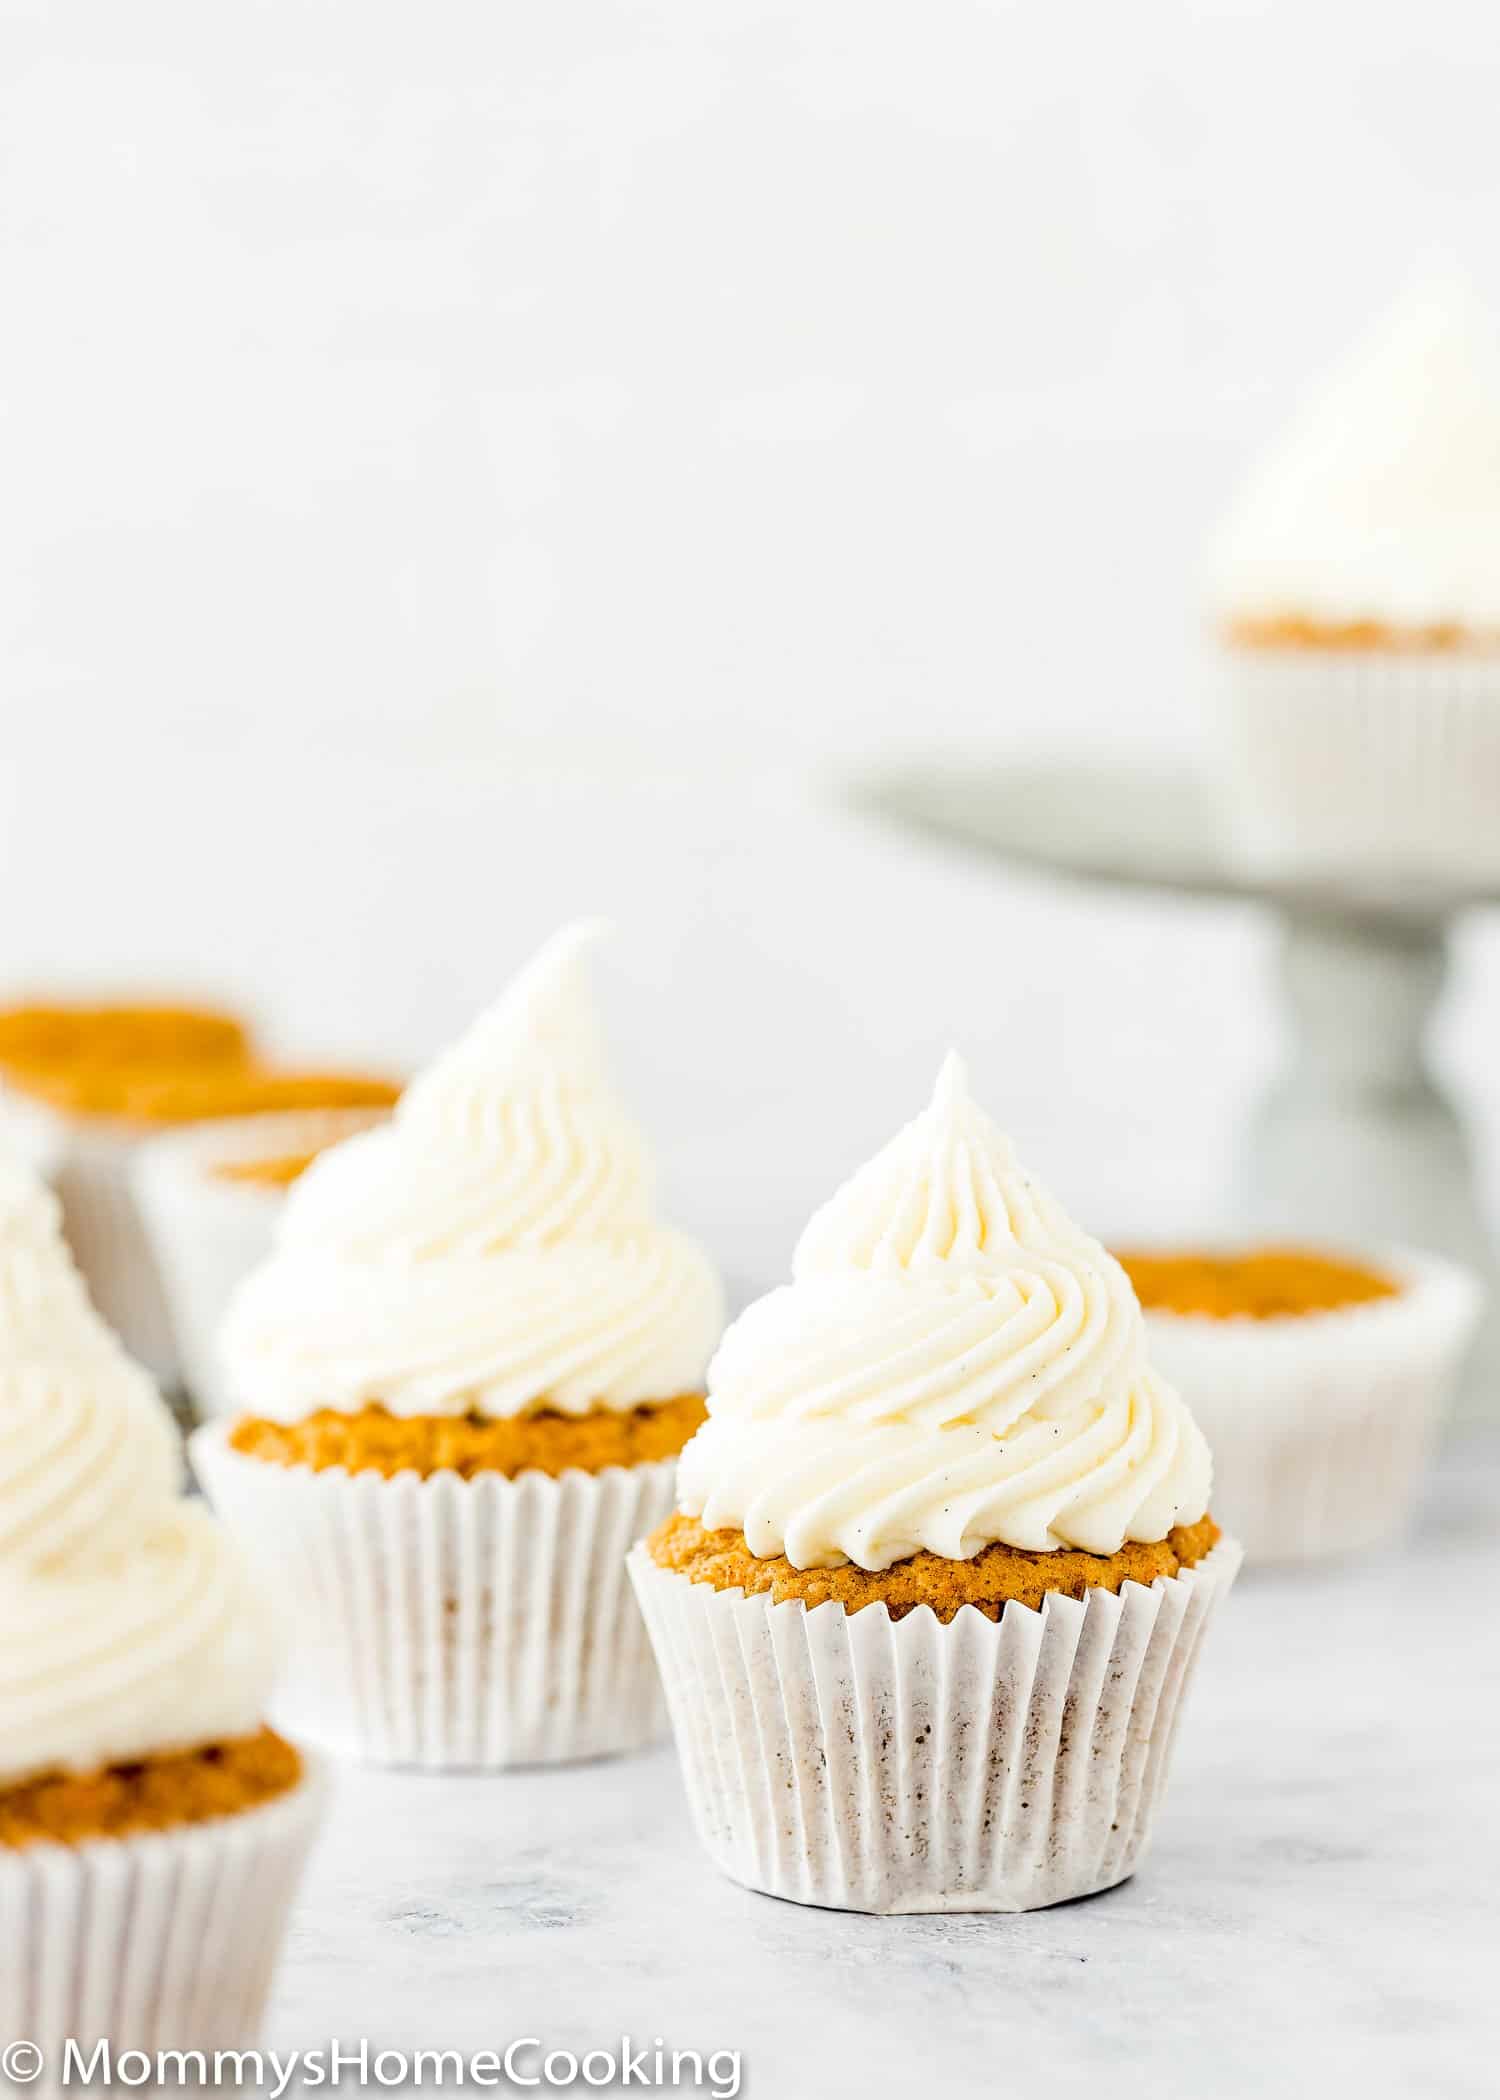 Eggless carrots cupcakes frosted with cream cheese frosting that isn't runny.